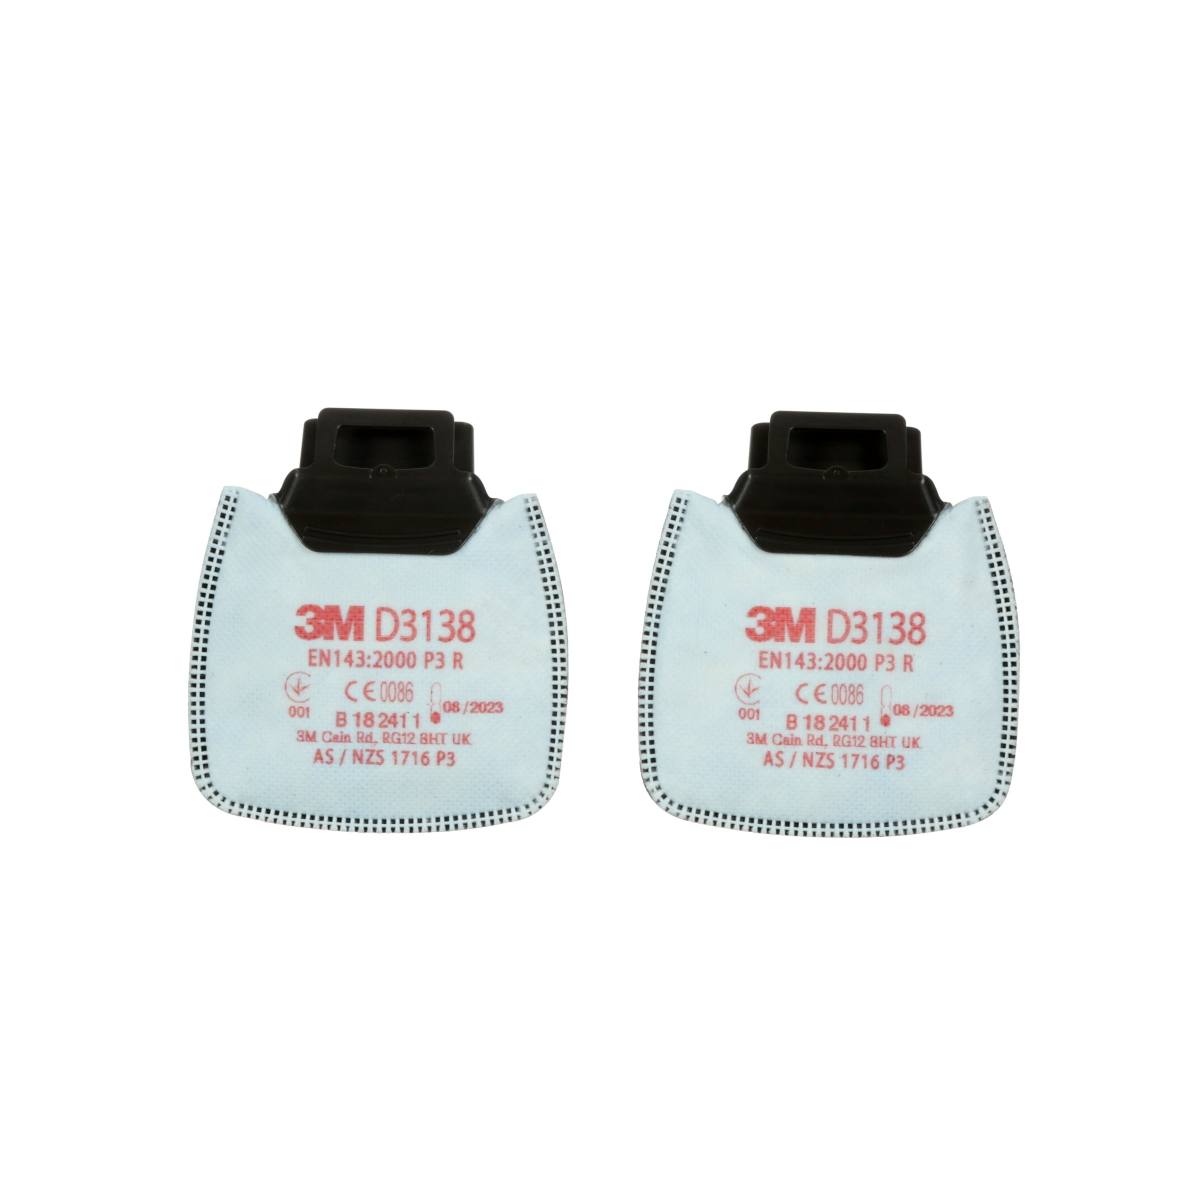 3M Secure Click D3138, P3 R Particle filter with activated carbon with additional protection against organic gases and vapors below the limit value and ozone up to 10 times the limit value. Ideal for welding